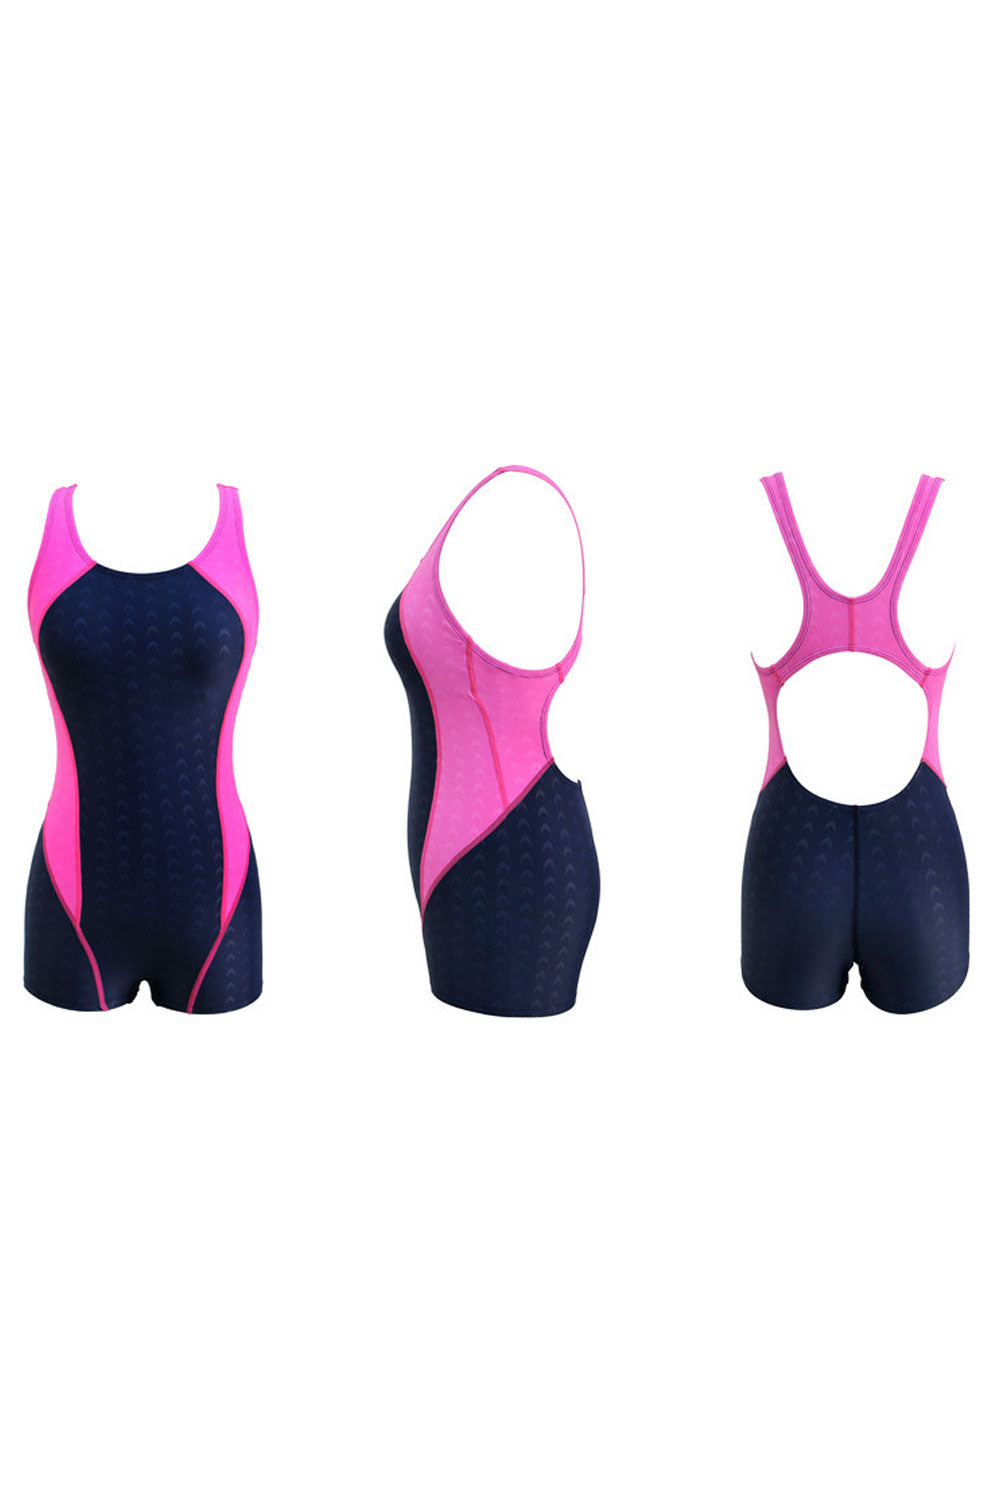 New waterproof and quick-drying imitation shark skin flat-angle sports professional women's one-piece swimsuit with removable chest pad